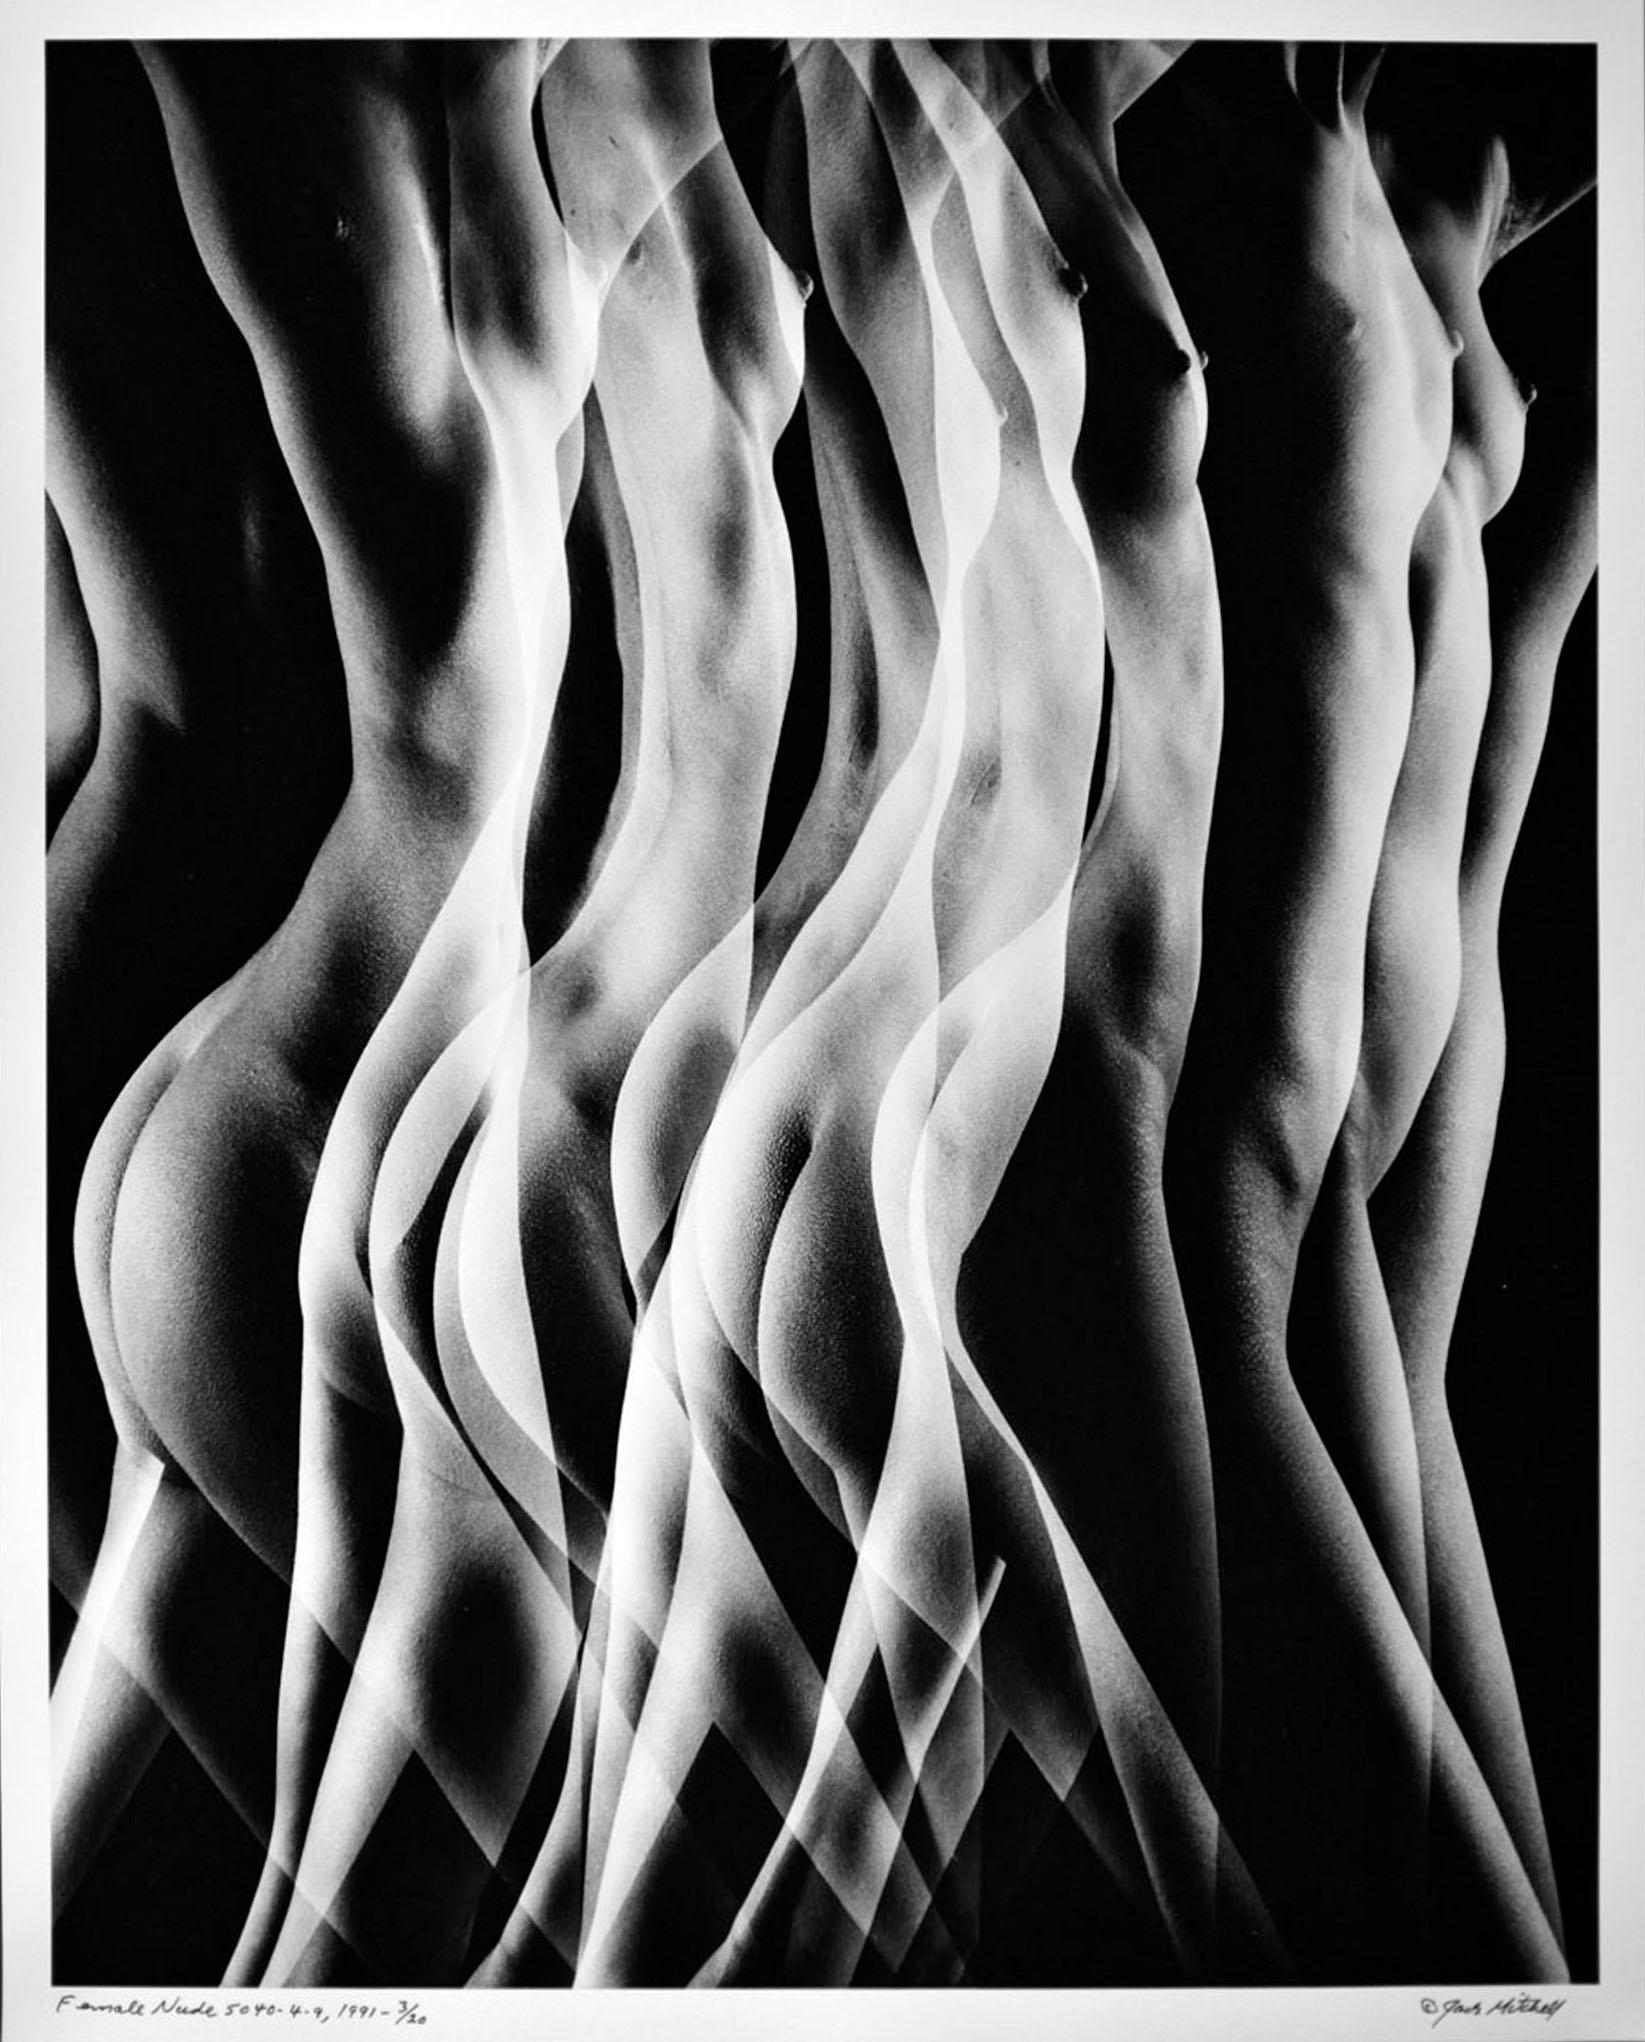 16 x 20" vintage silver gelatin photograph, multiple exposure female nude. Titled, numbered, dated, and signed by Jack Mitchell on the recto. Comes directly from the Jack Mitchell Archives with a certificate of authenticity.

Jack Mitchell's